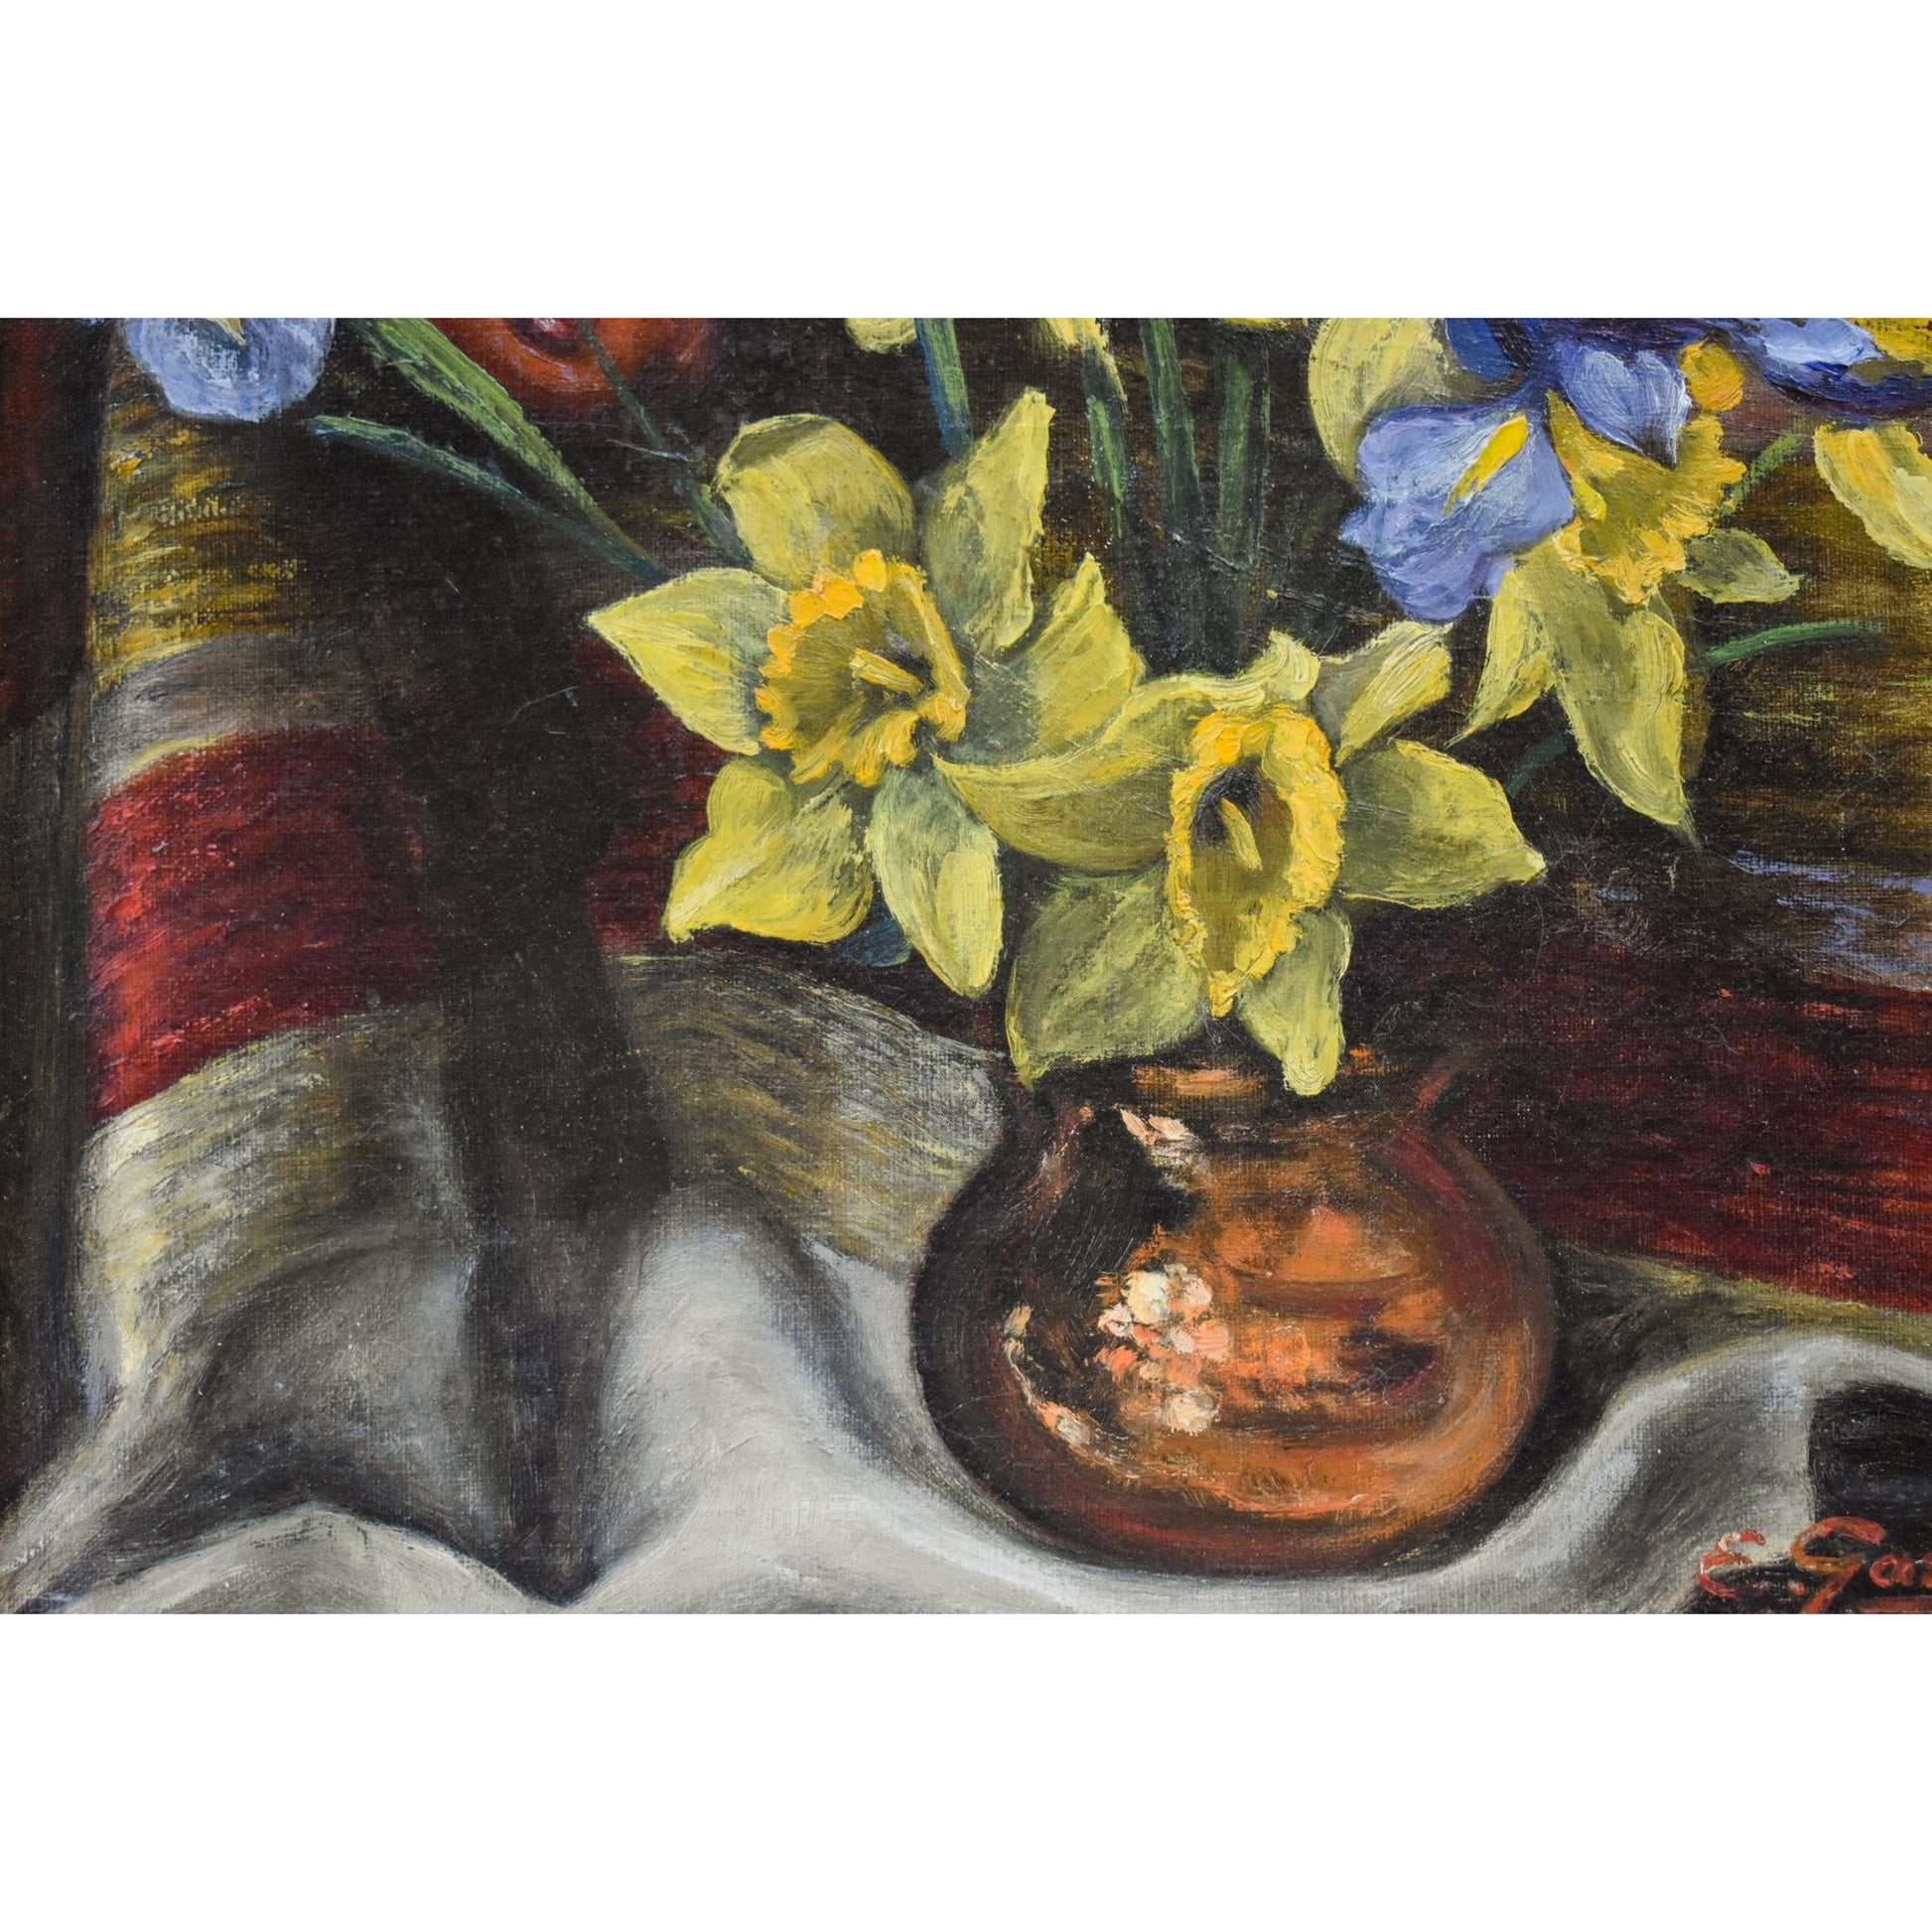 Vintage still life oil painting, flowers vase and evil mask circa 1950, signed Gassée, for sale at Winckelmann Gallery